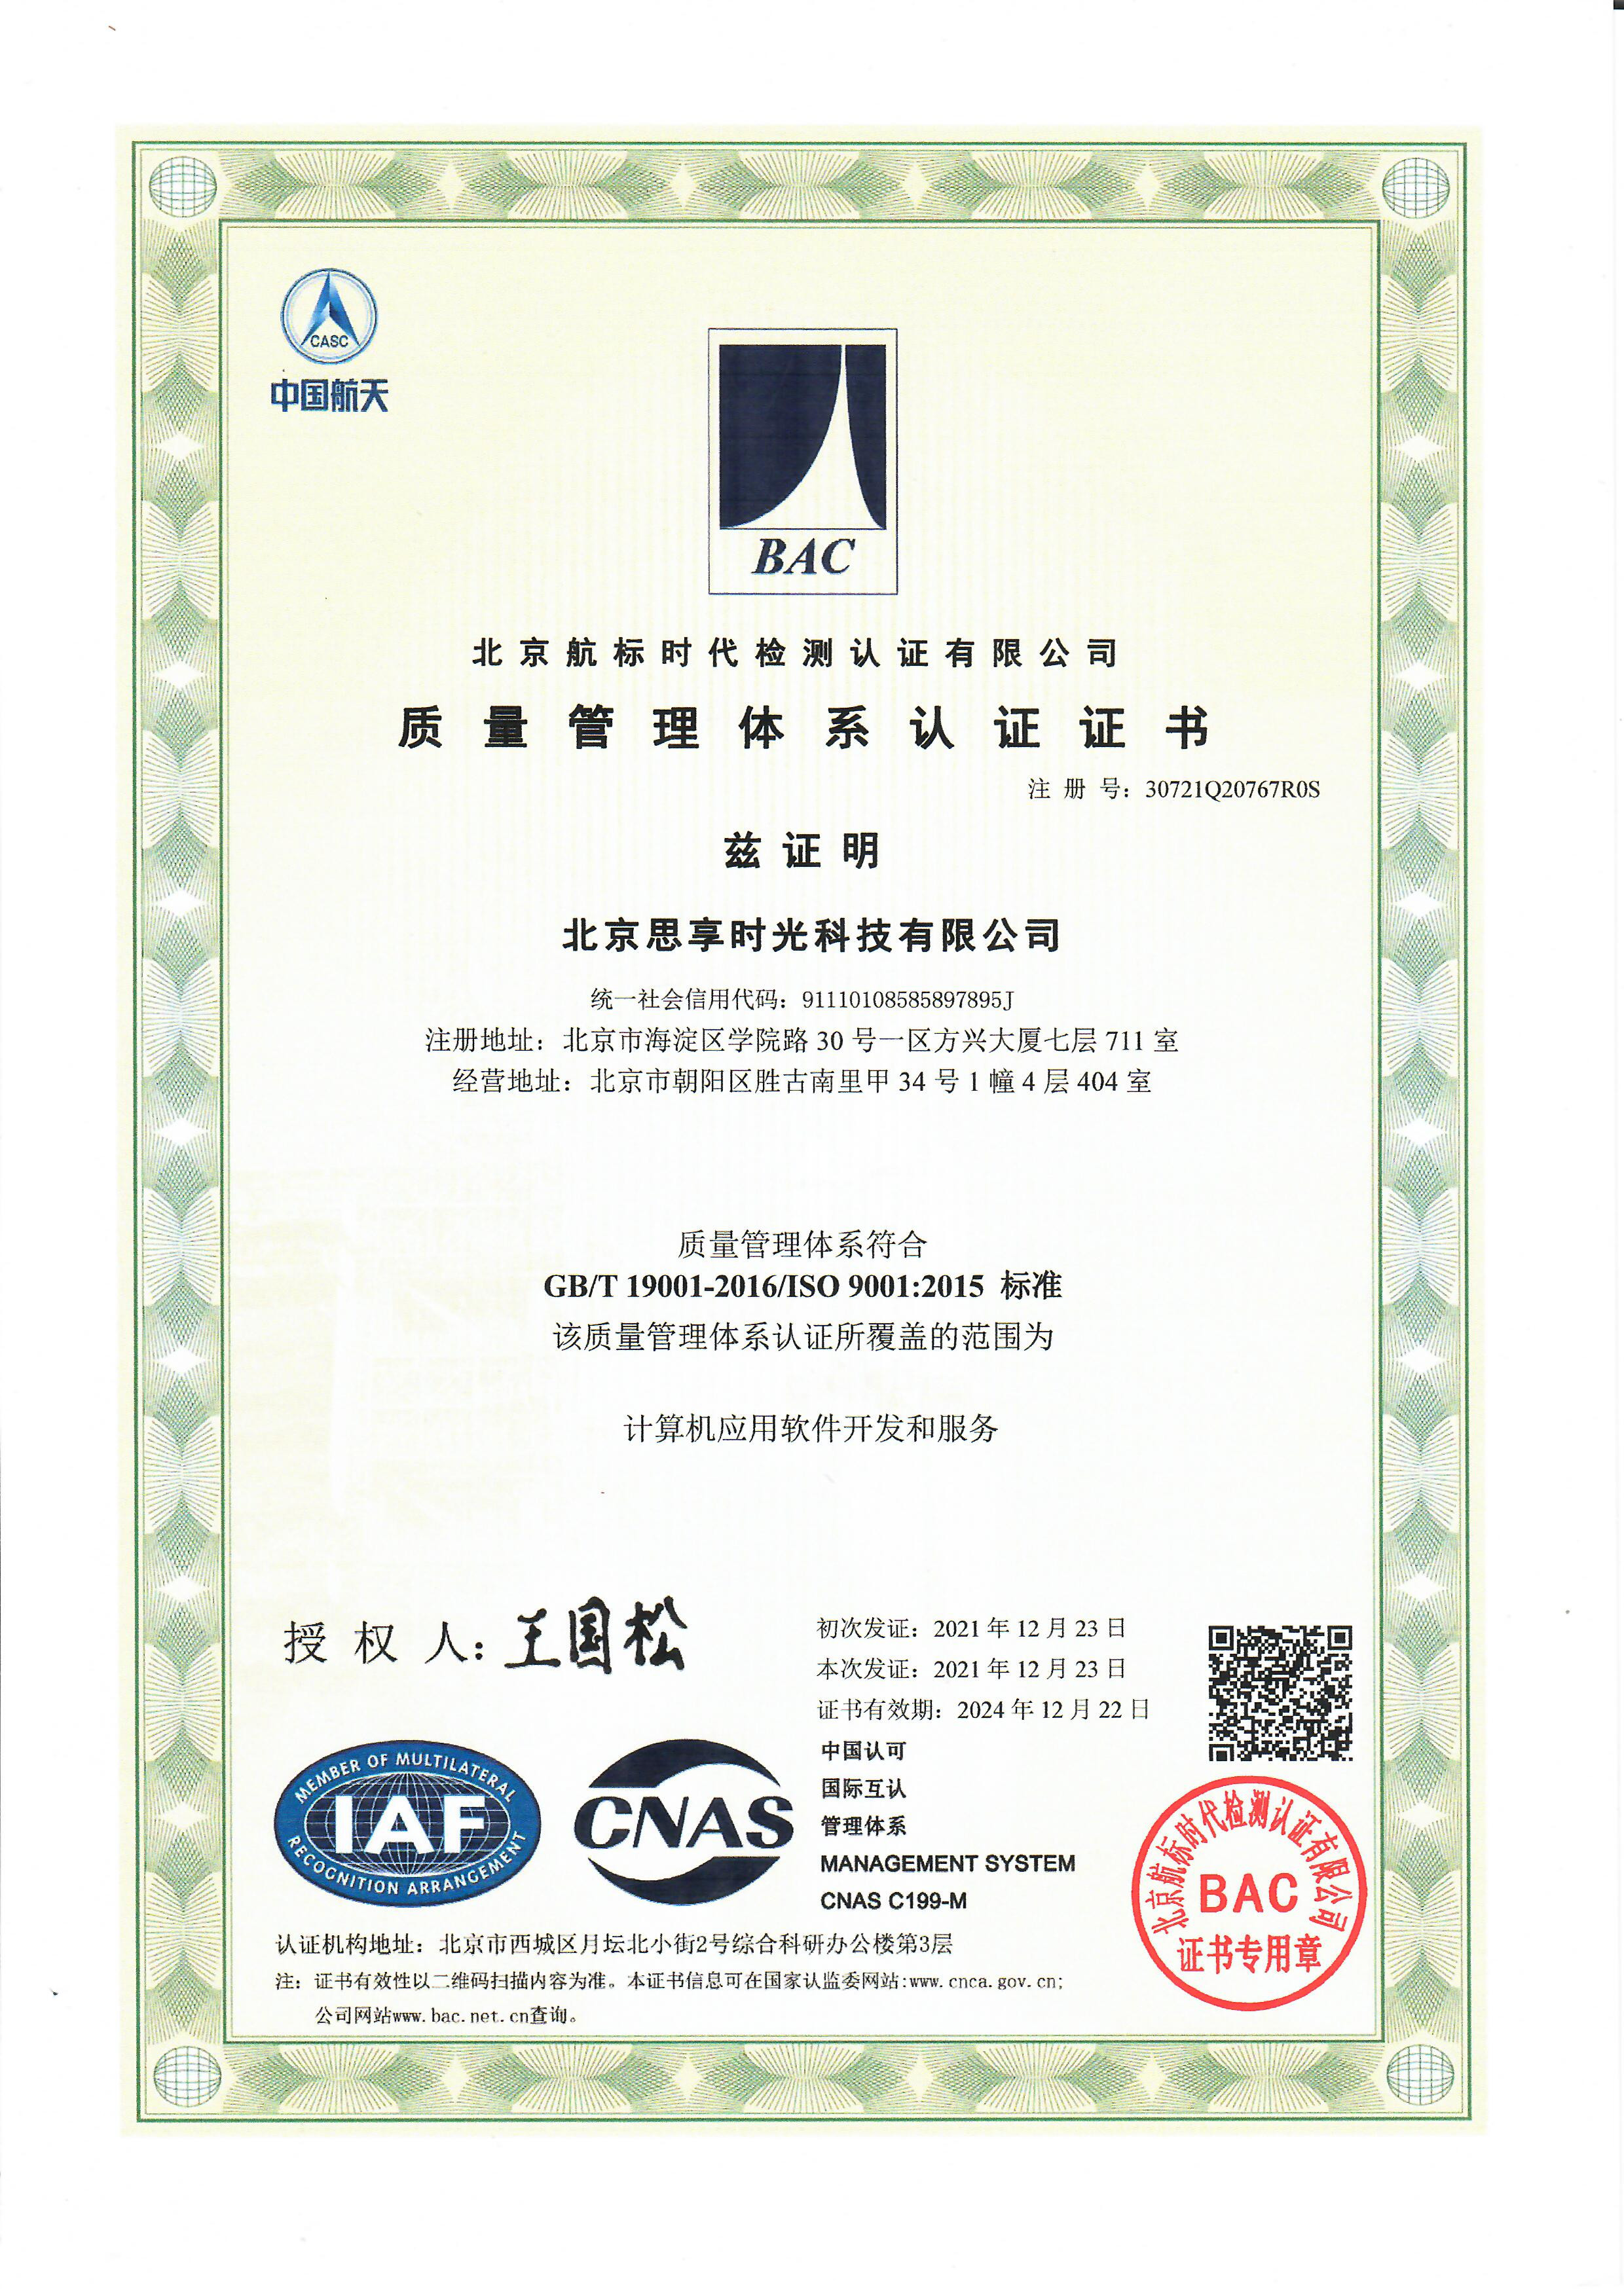                             ISO9001 quality management system certification
                        